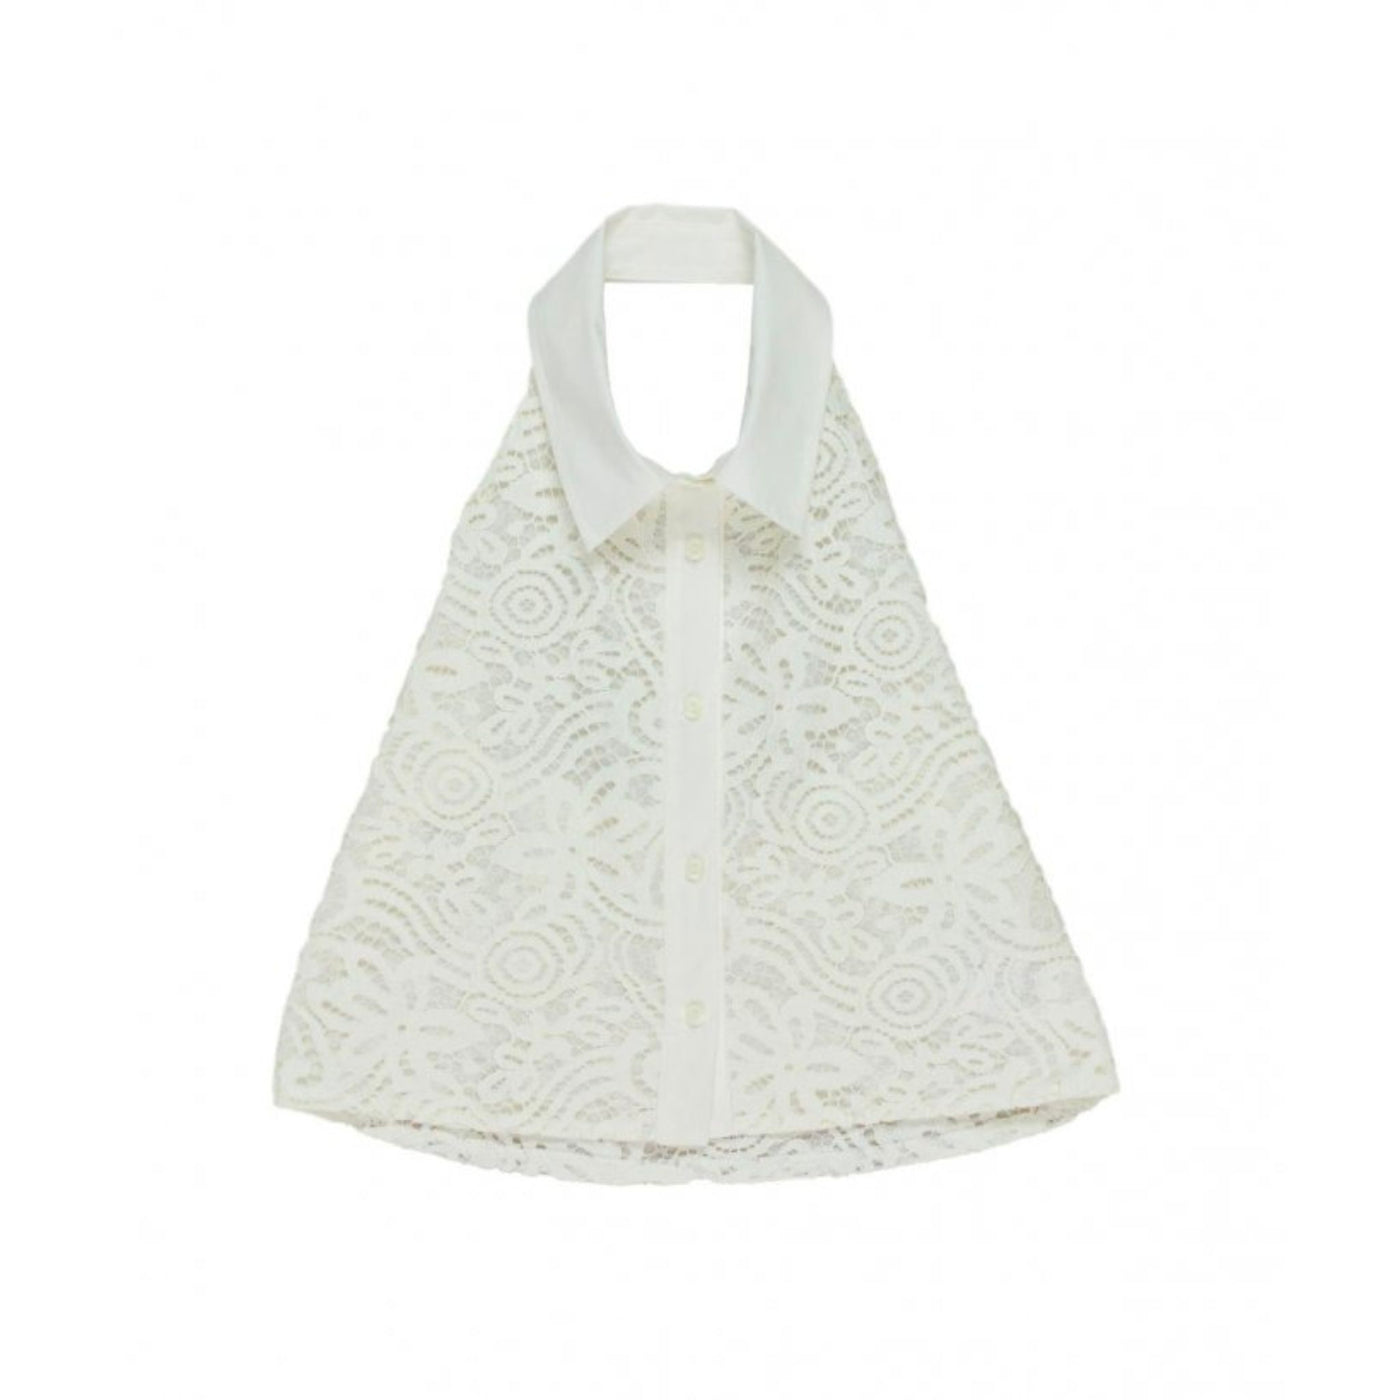 Lace shirt for girls 8-14 years